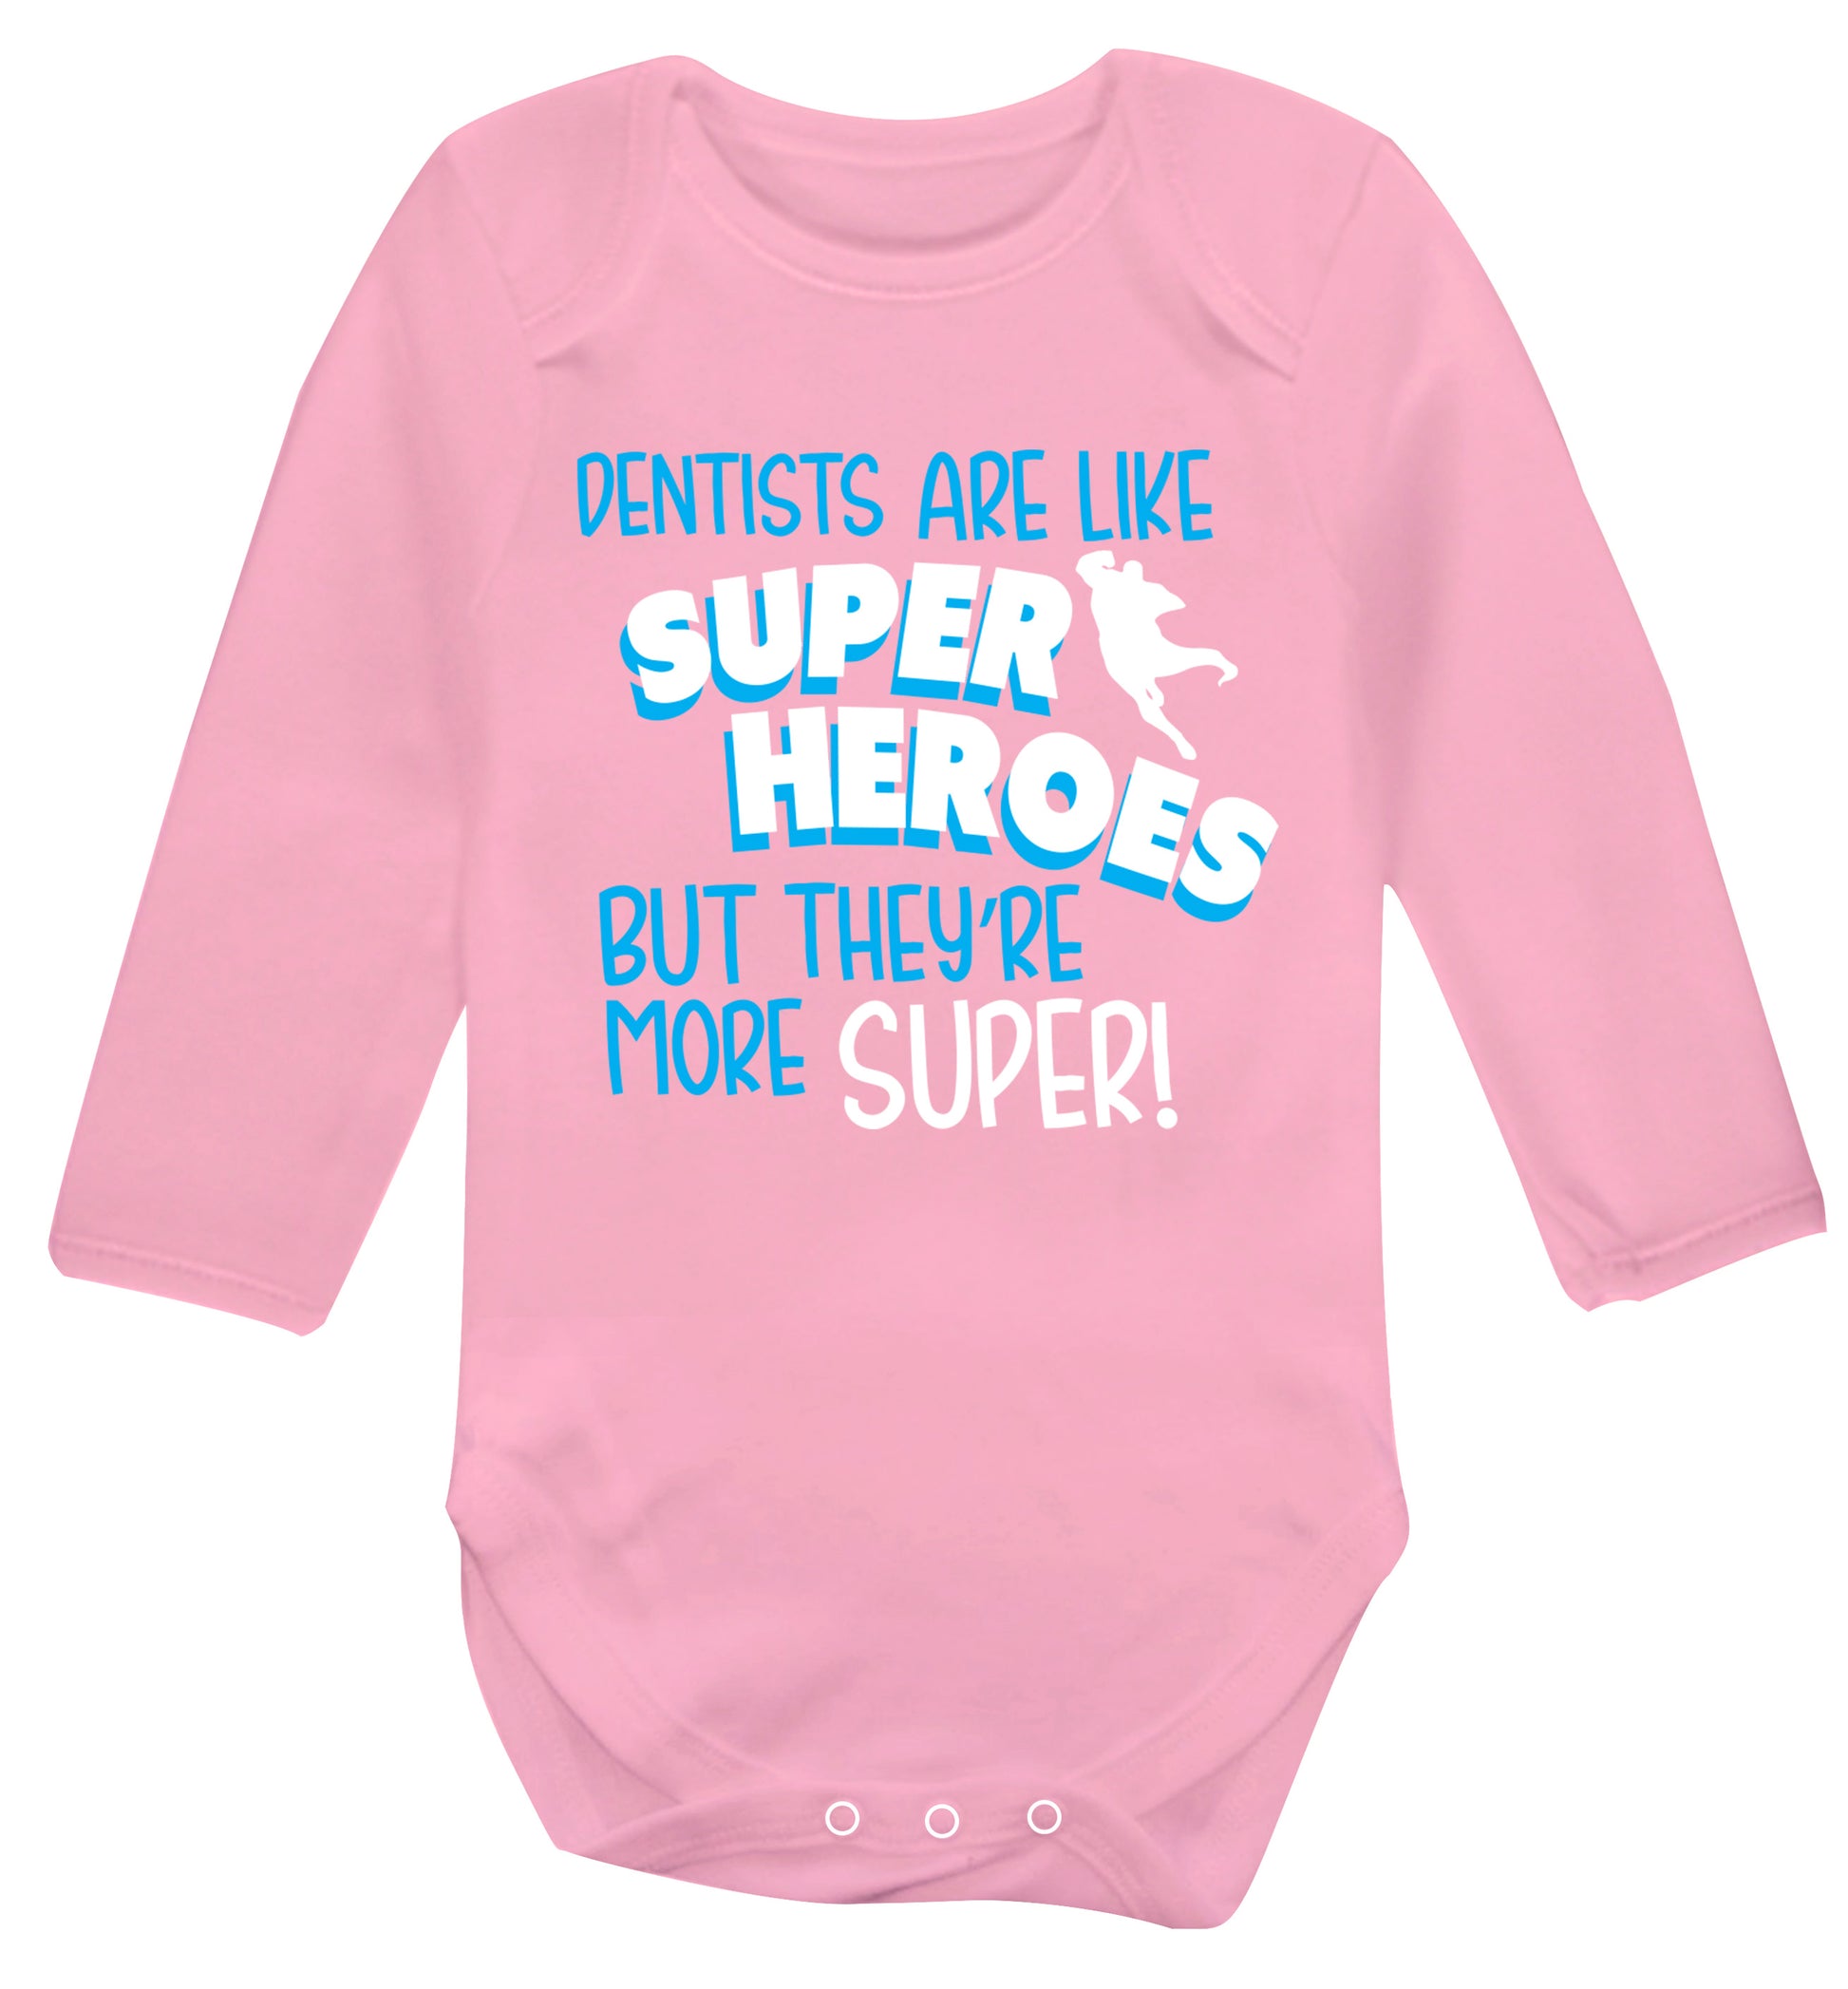 Dentists are like superheros but they're more super Baby Vest long sleeved pale pink 6-12 months